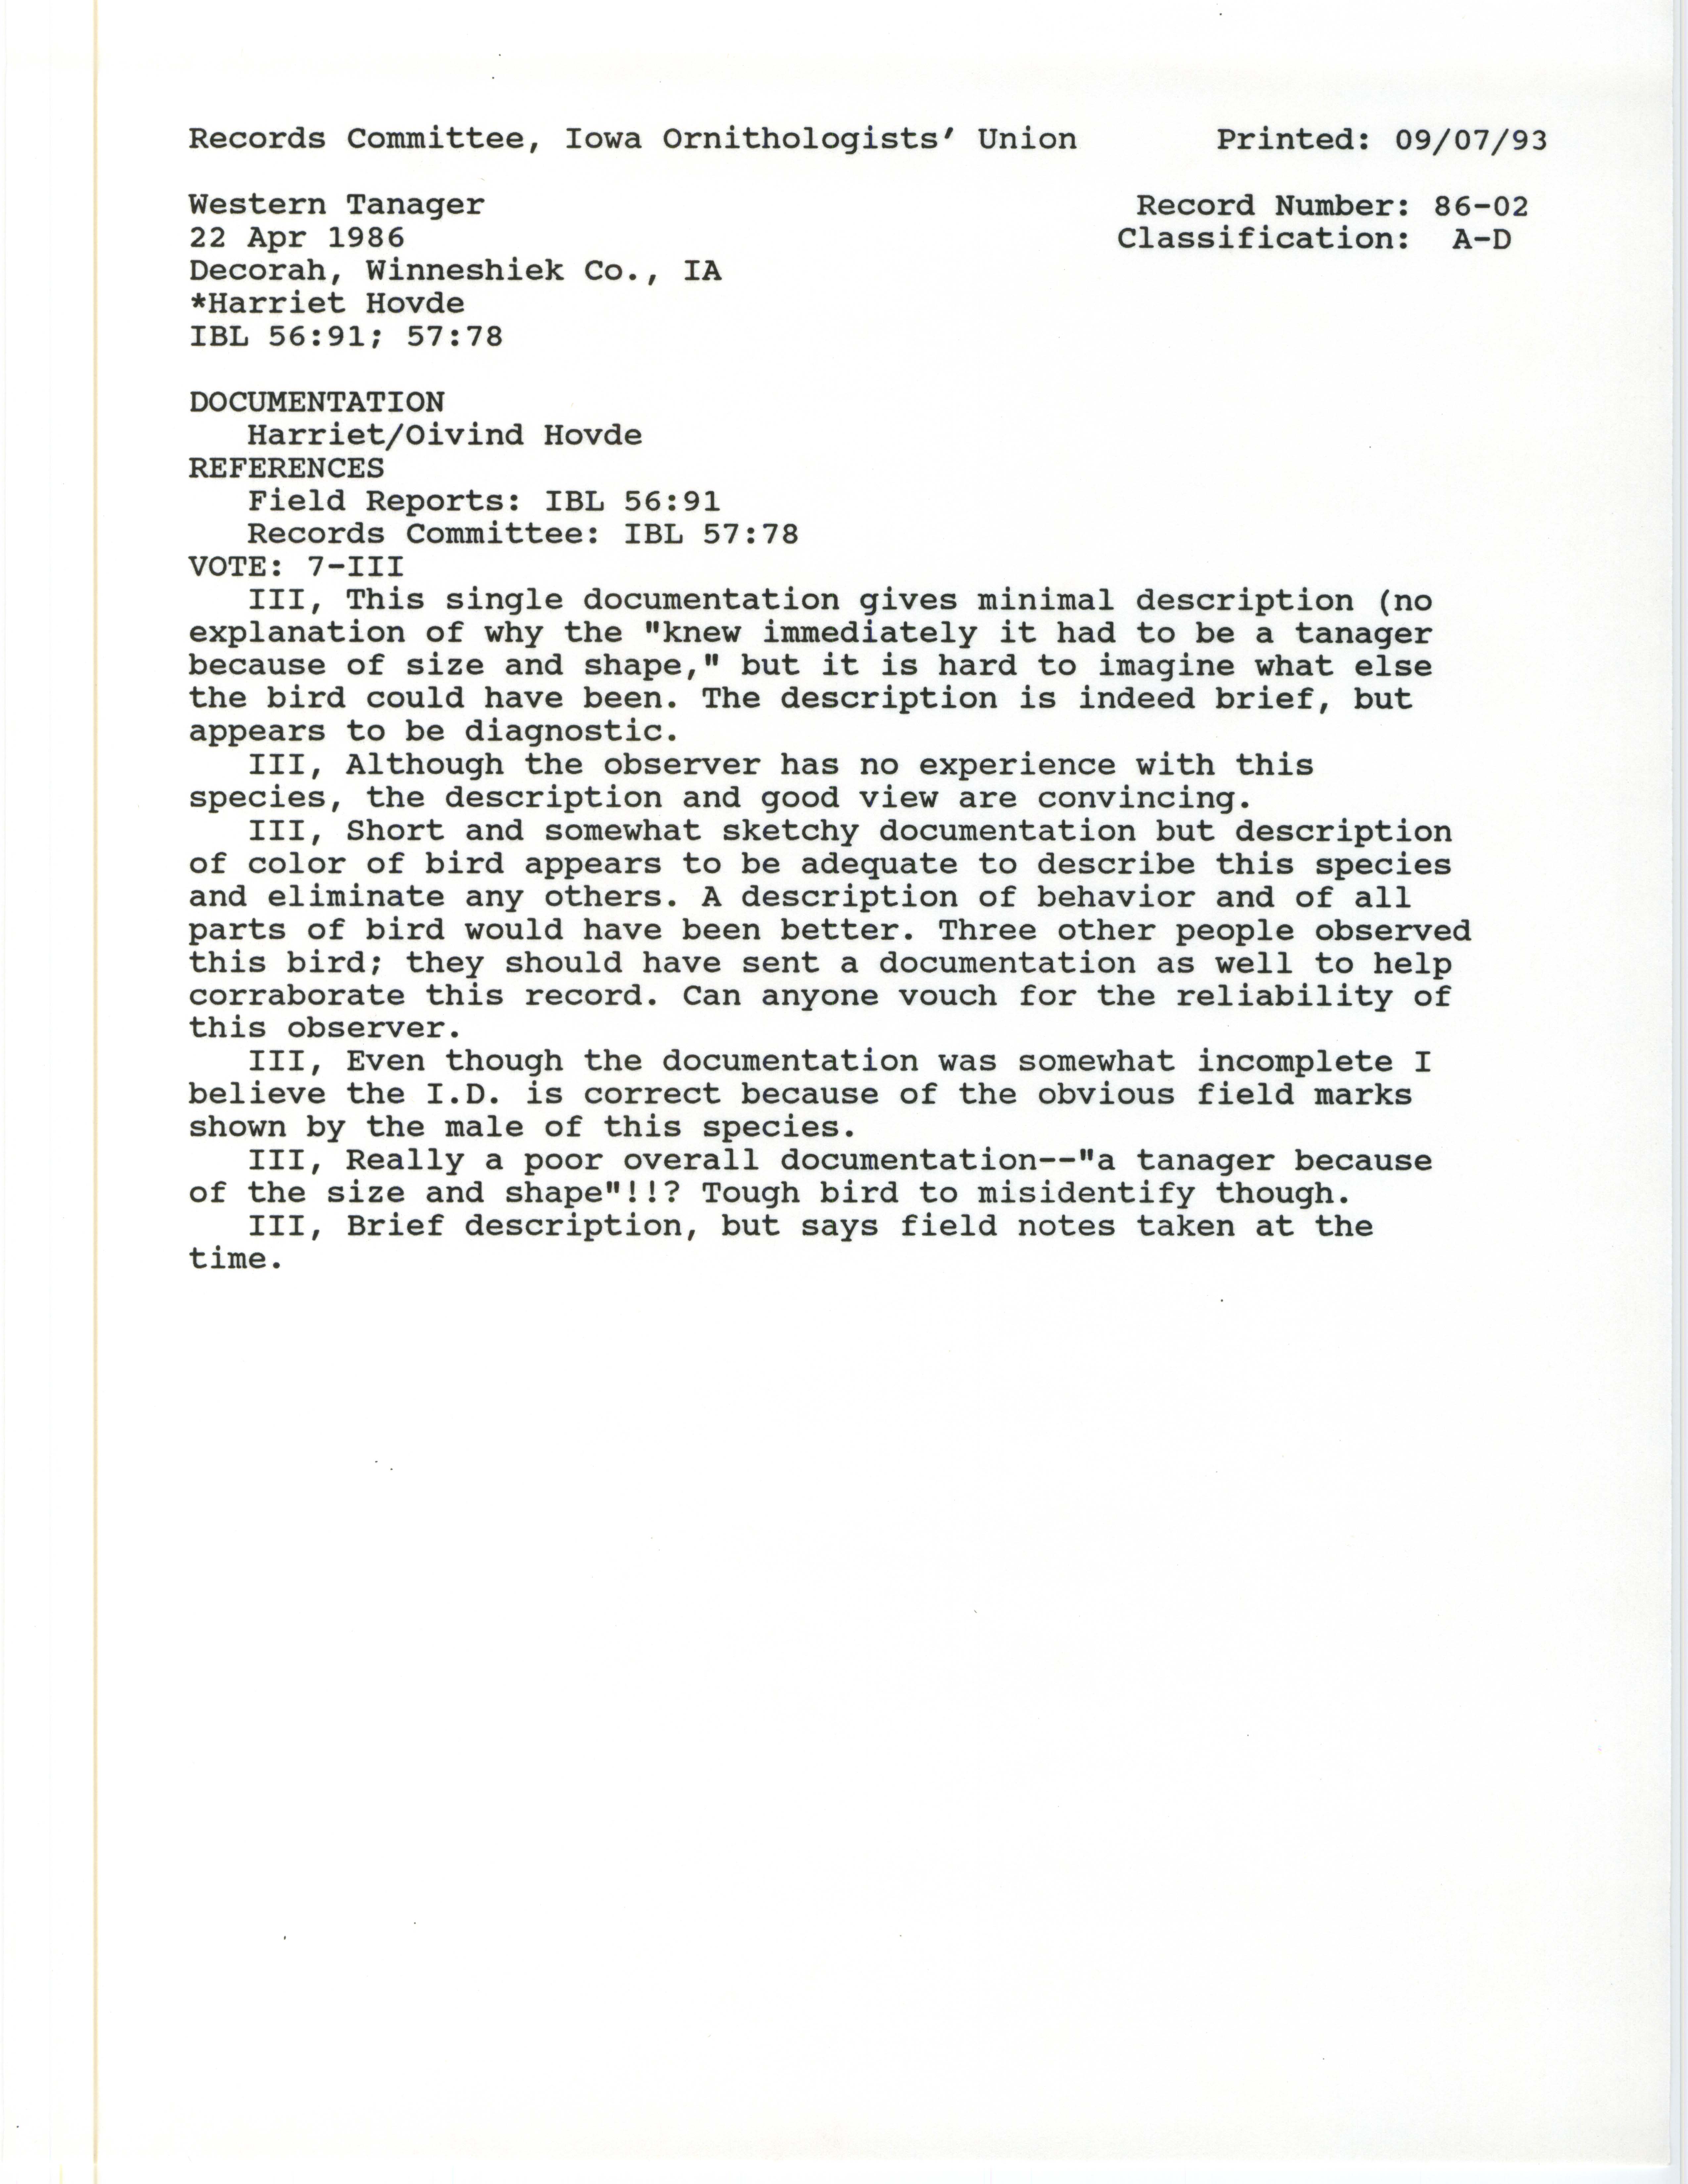 Records Committee review for rare bird sighting for Western Tanager at Decorah, 1986